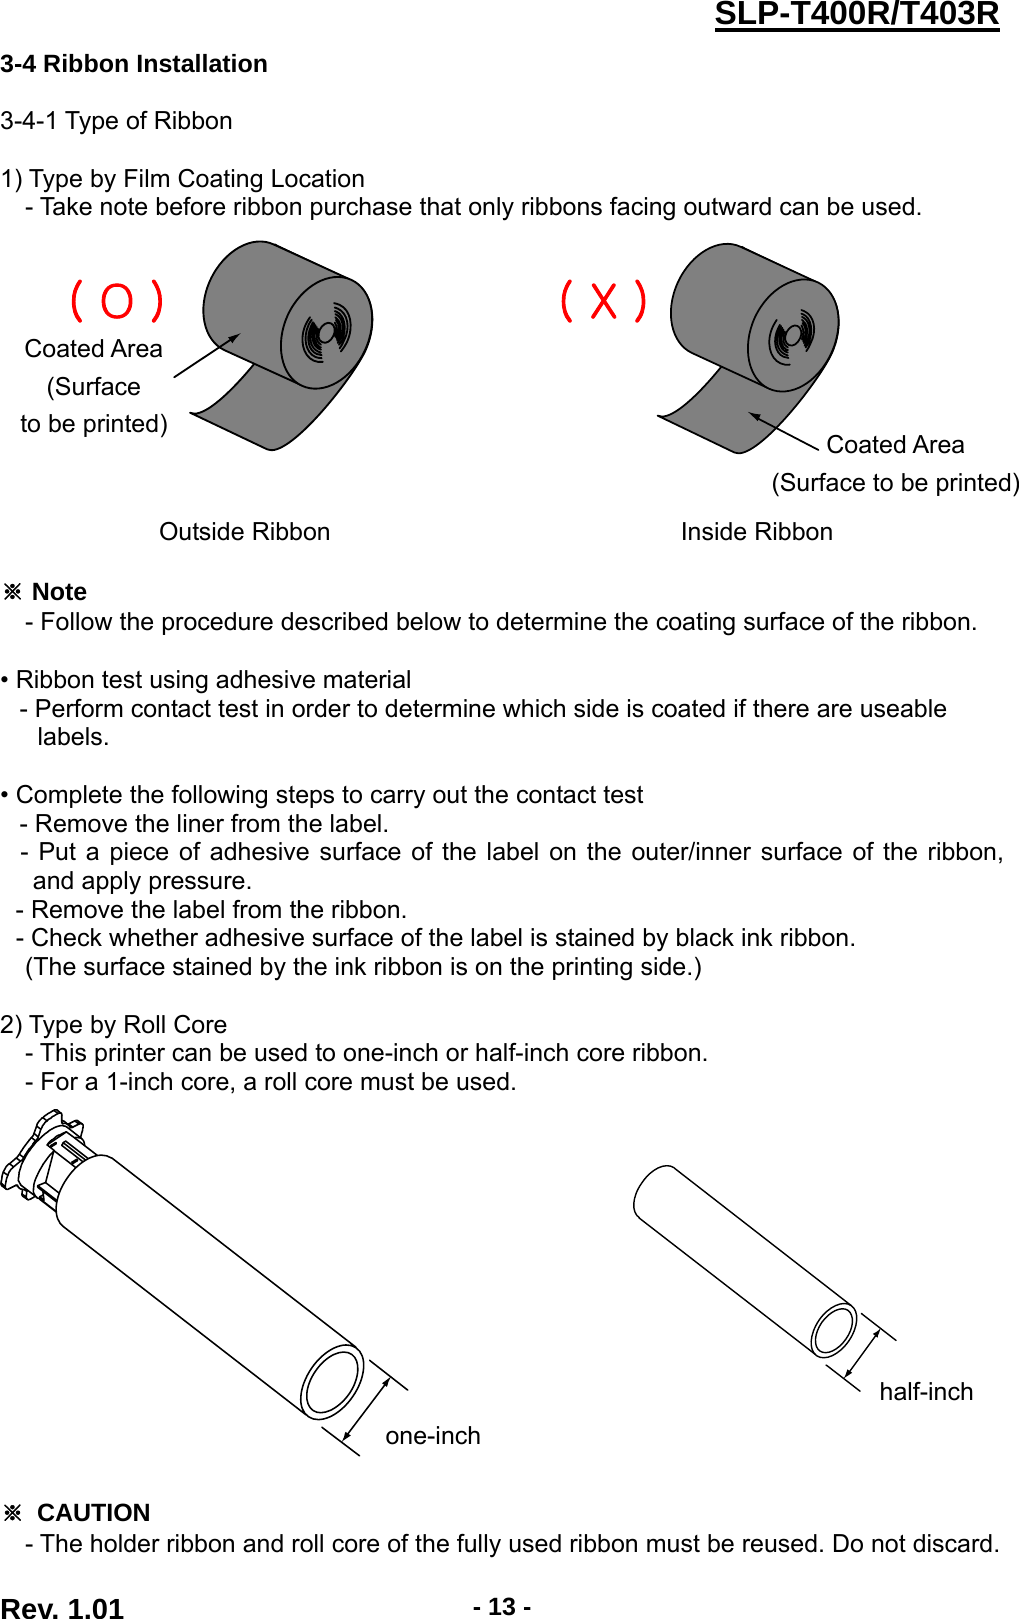  Rev. 1.01  - 13 -SLP-T400R/T403R3-4 Ribbon Installation  3-4-1 Type of Ribbon  1) Type by Film Coating Location - Take note before ribbon purchase that only ribbons facing outward can be used.               Outside Ribbon  Inside Ribbon  ※ Note   - Follow the procedure described below to determine the coating surface of the ribbon.    • Ribbon test using adhesive material      - Perform contact test in order to determine which side is coated if there are useable       labels.   • Complete the following steps to carry out the contact test      - Remove the liner from the label. - Put a piece of adhesive surface of the label on the outer/inner surface of the ribbon, and apply pressure.   - Remove the label from the ribbon. - Check whether adhesive surface of the label is stained by black ink ribbon.     (The surface stained by the ink ribbon is on the printing side.)  2) Type by Roll Core - This printer can be used to one-inch or half-inch core ribbon. - For a 1-inch core, a roll core must be used.          ※ CAUTION - The holder ribbon and roll core of the fully used ribbon must be reused. Do not discard. one-inch half-inch Coated Area (Surface  to be printed) Coated Area (Surface to be printed)( O ) ( X )